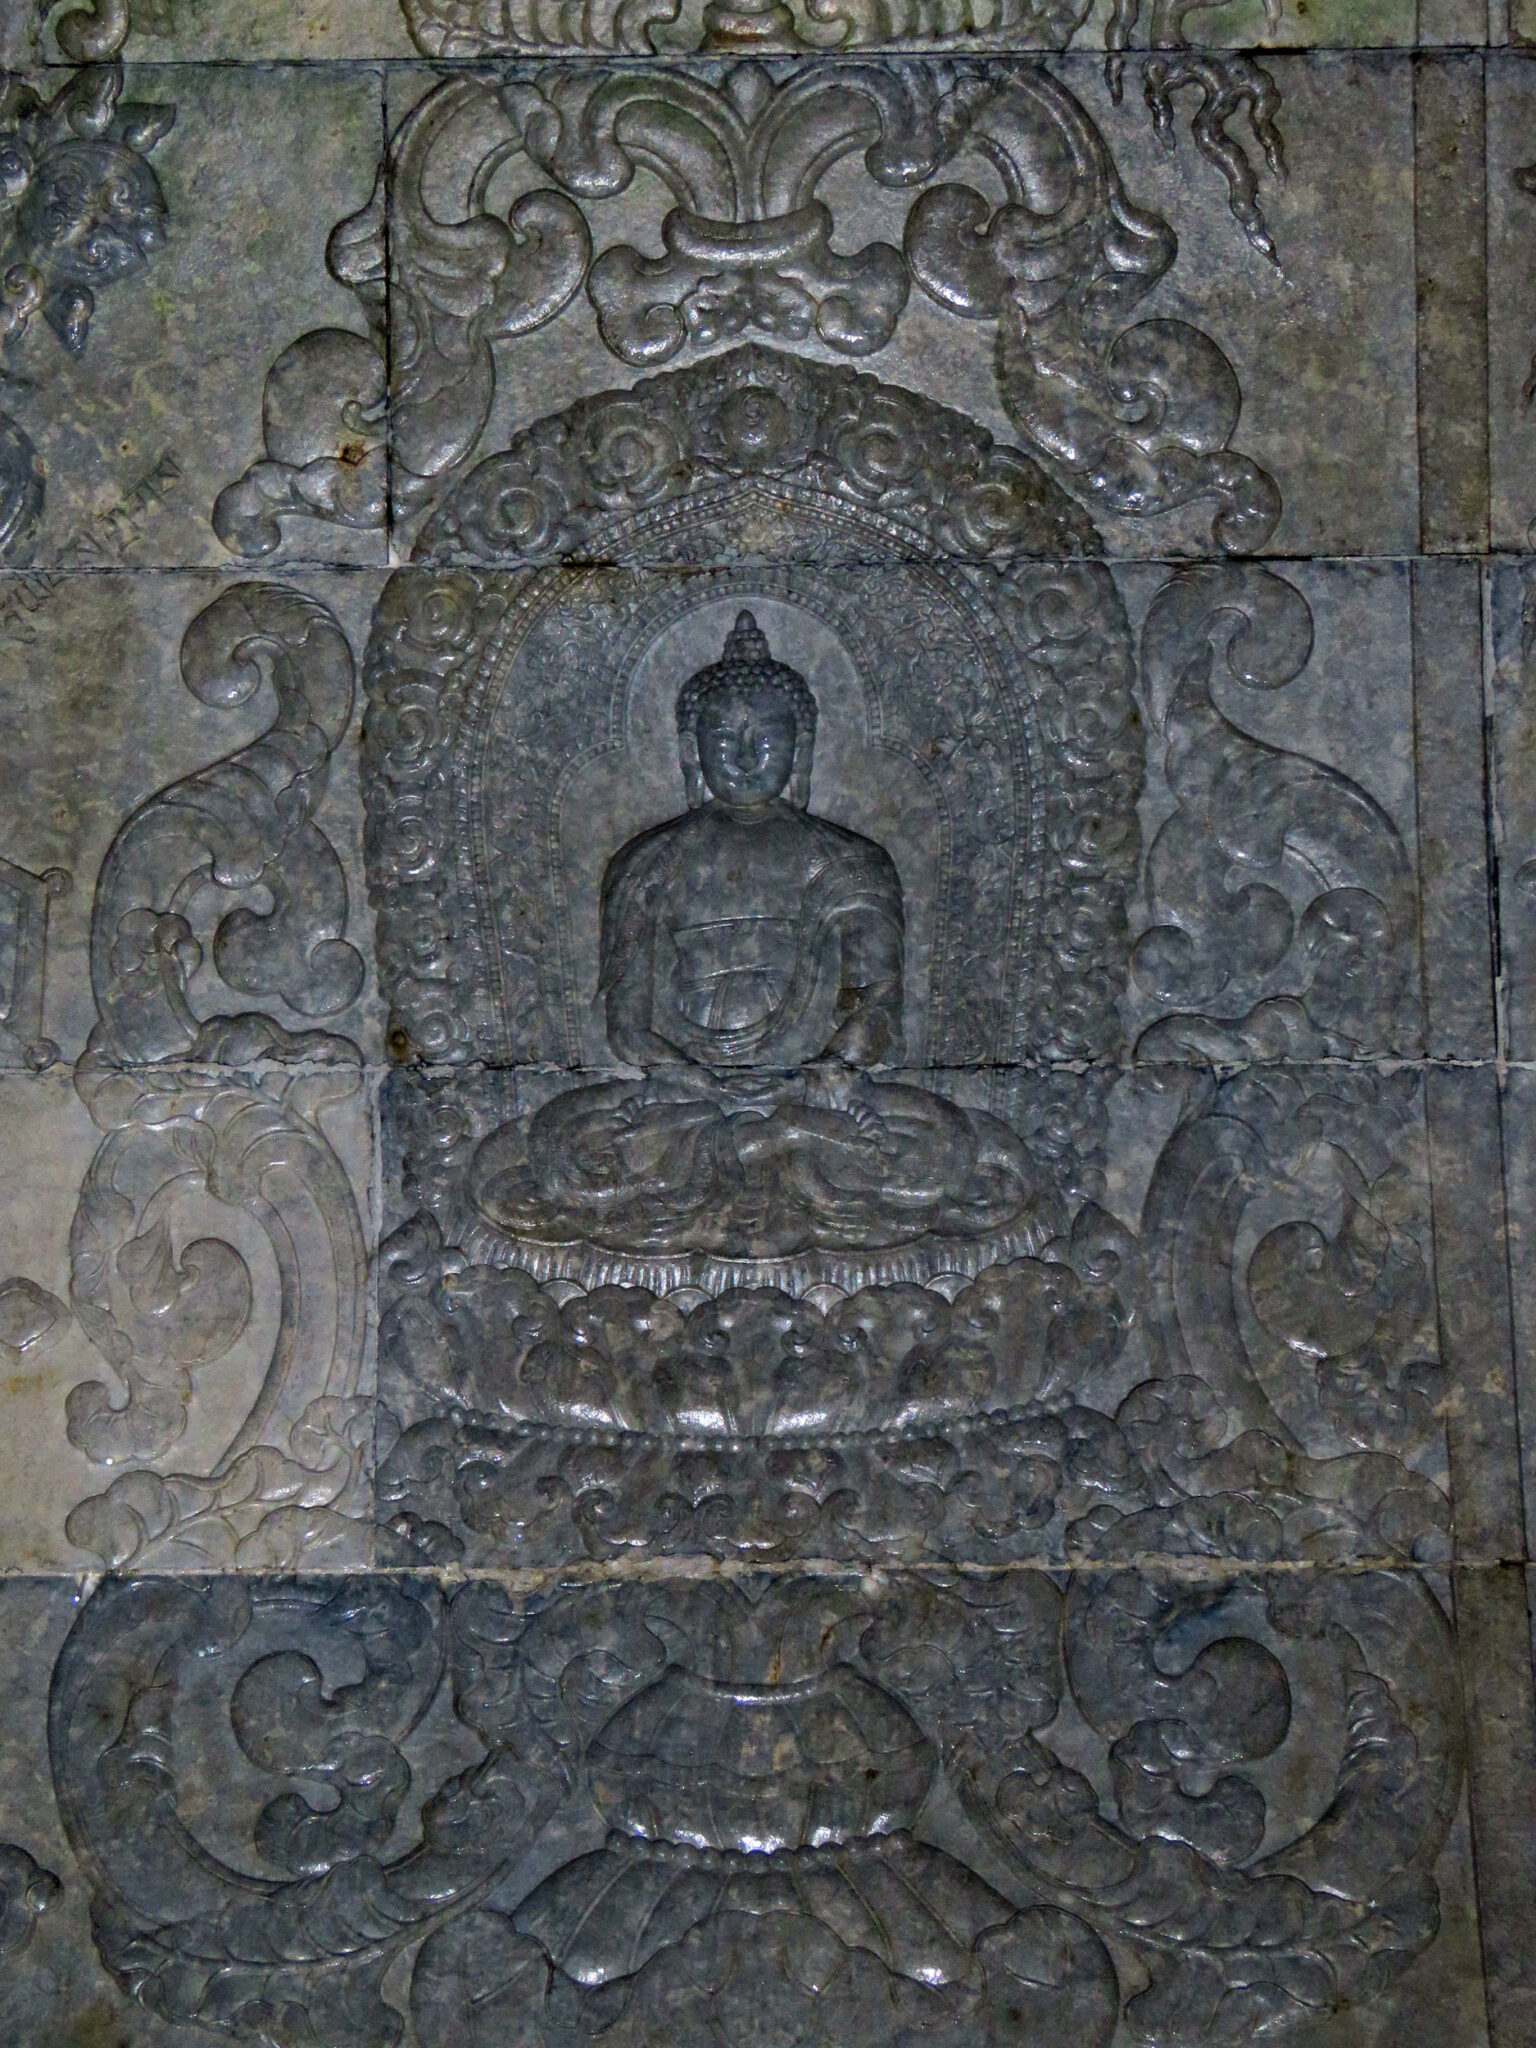 Relief carving depicting Buddha seated on lotus pedestal supported and enclosed by scrollwork motif